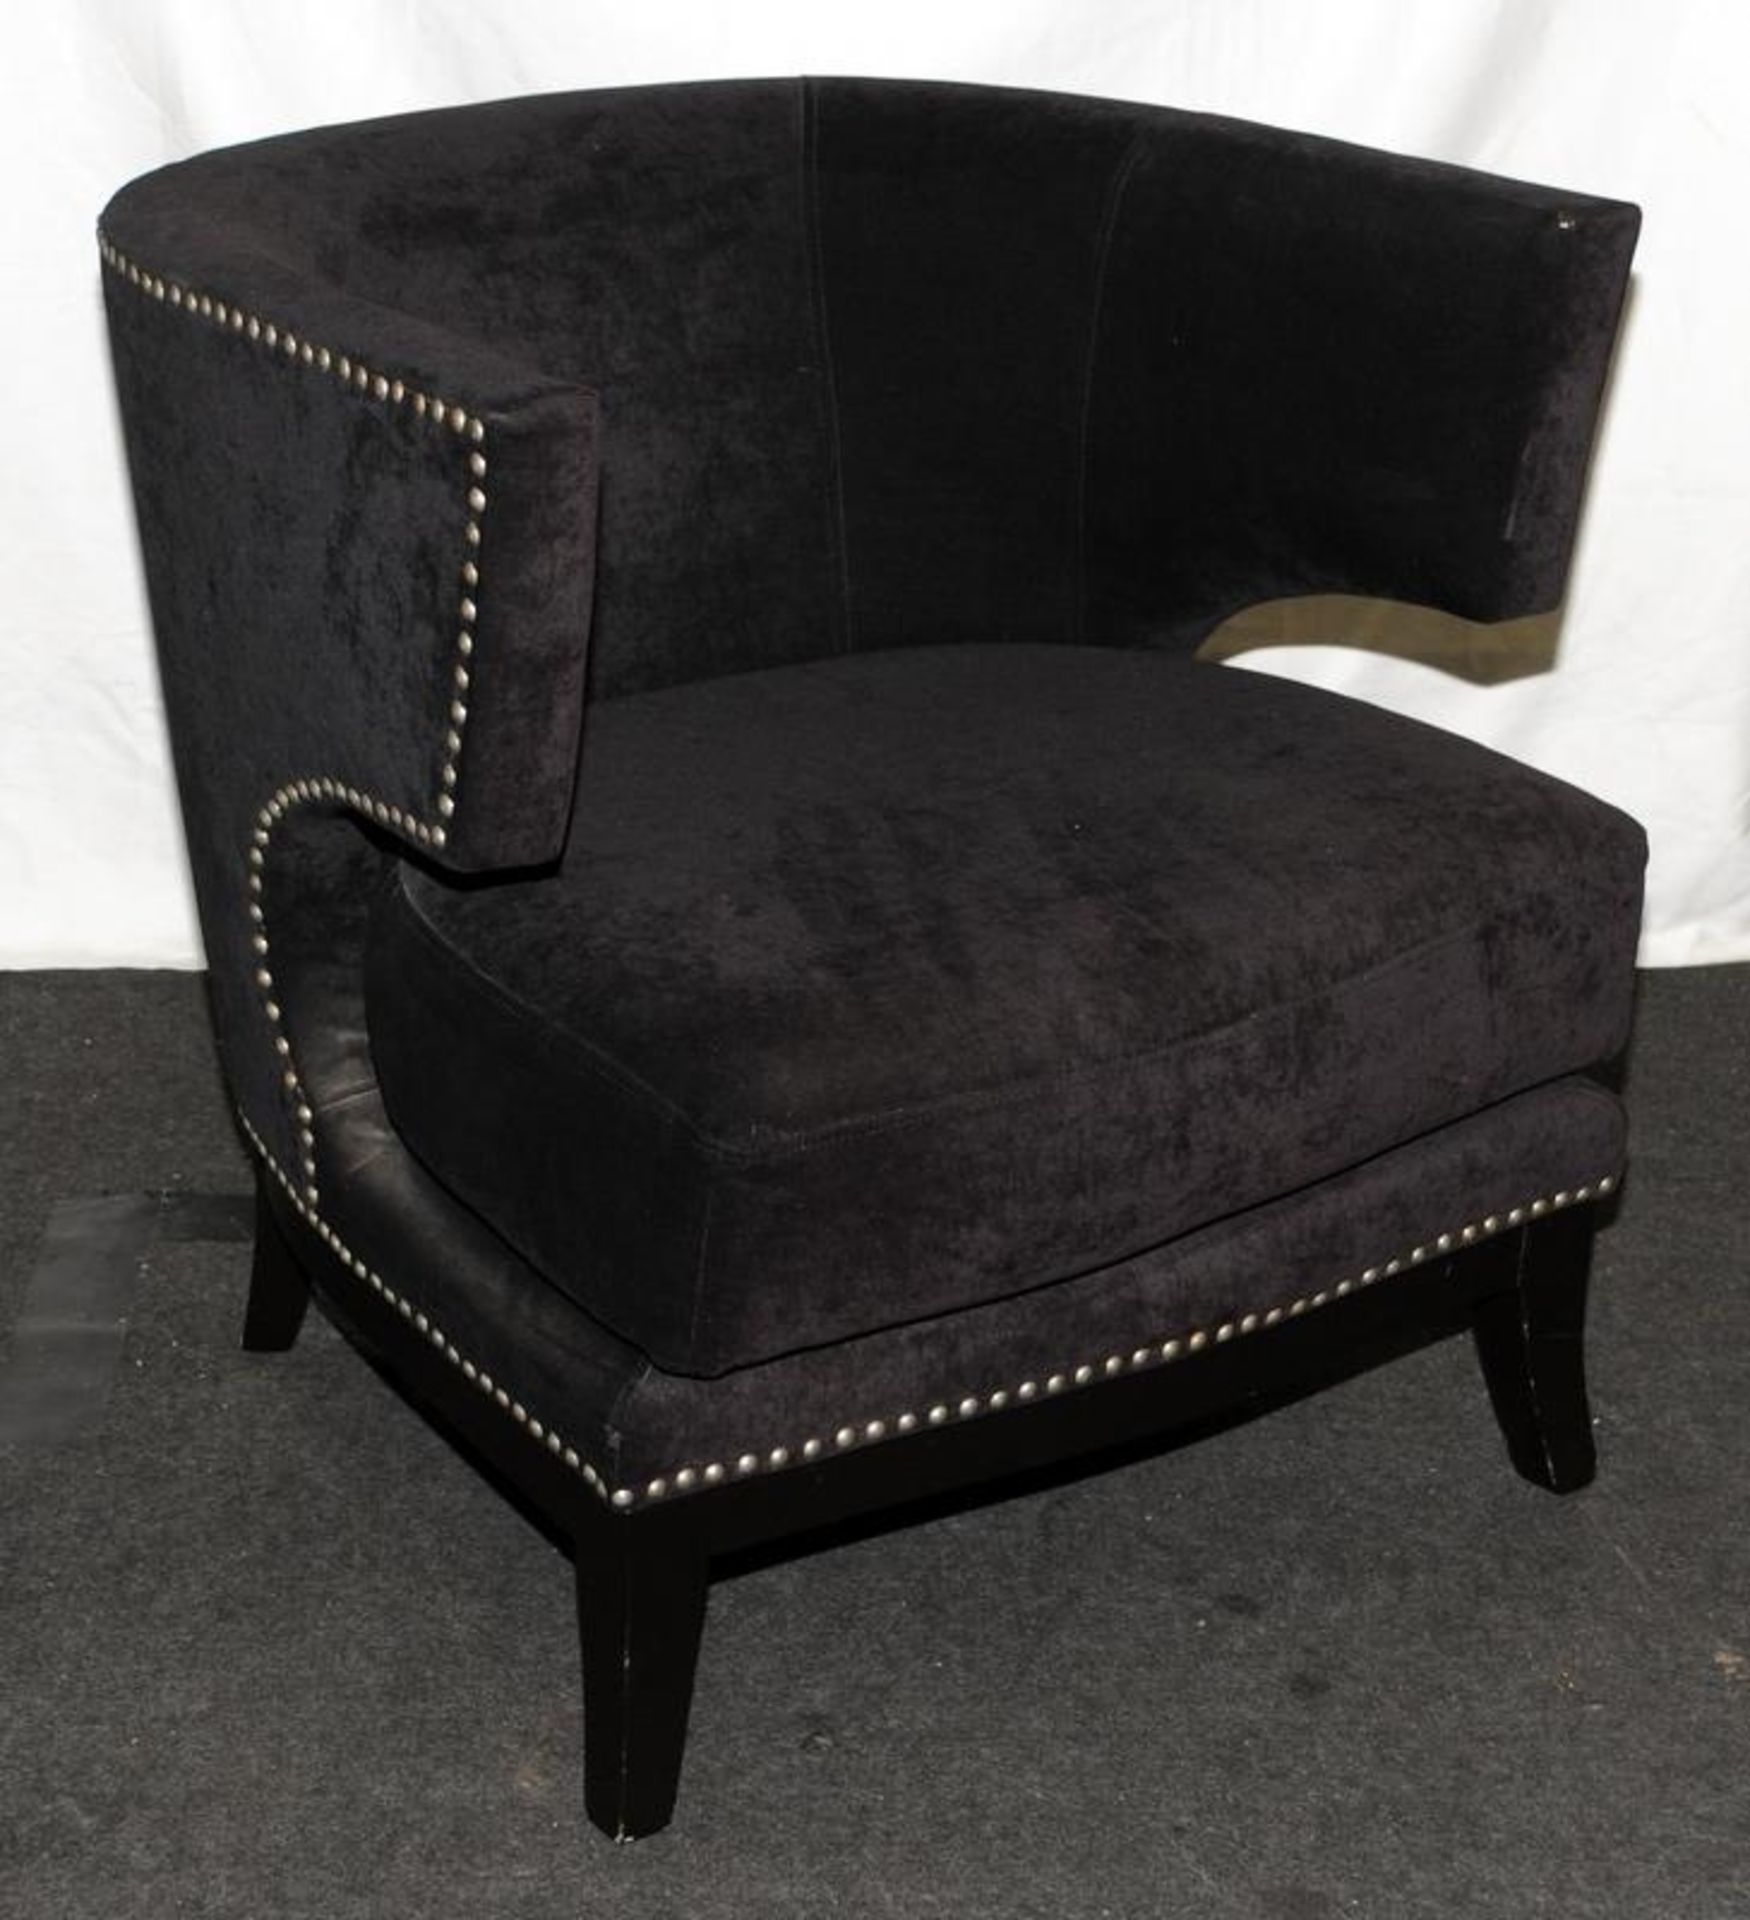 Contemporary tub chair upholstered in black fabric with stud detailing. Seat height 42cms, 76cms